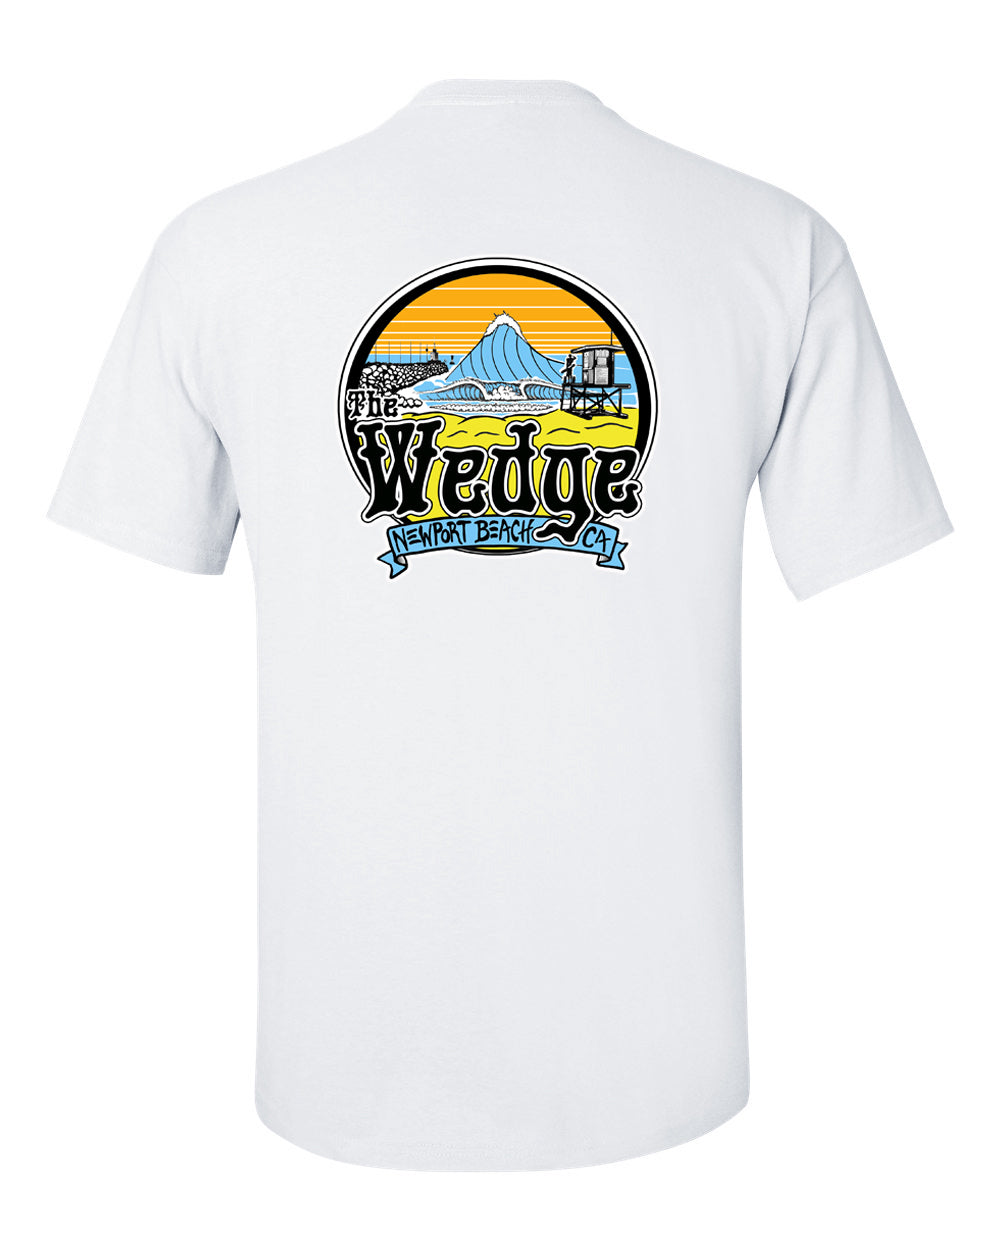 Wedge Griffin Short Sleeve Tee - White